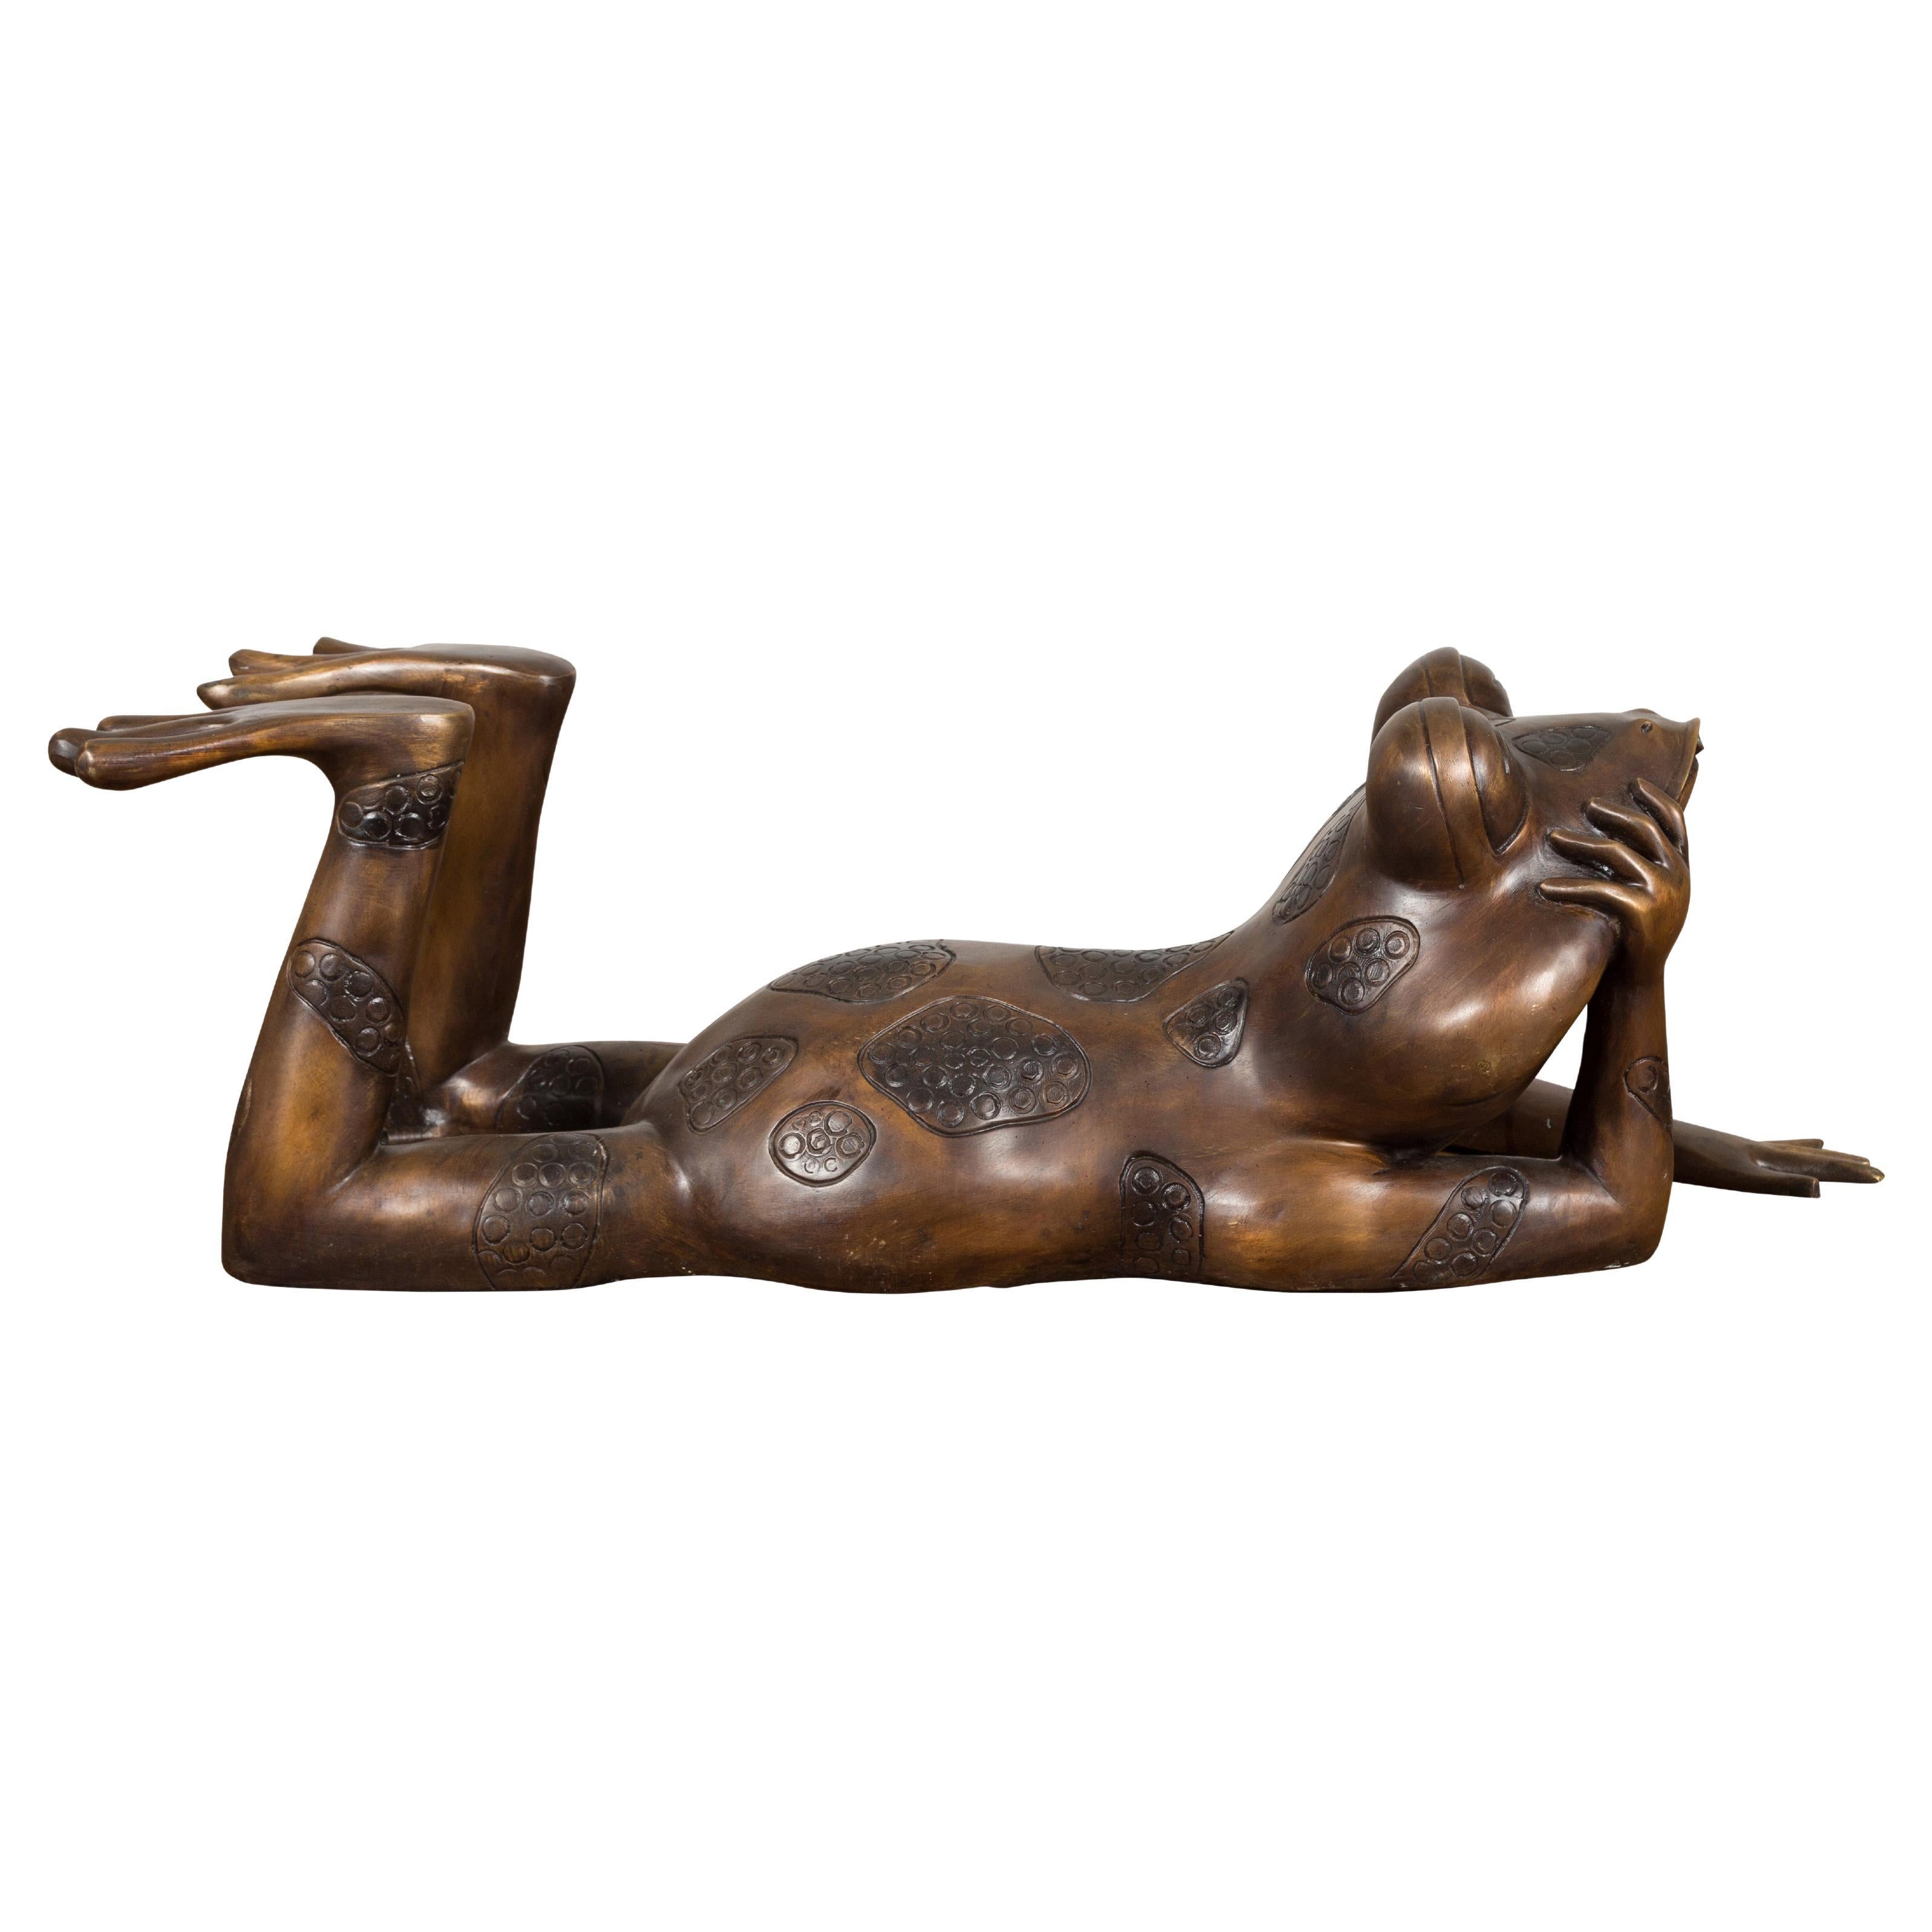 Daydreaming Frog Bronze Sculpture with Golden Patina, Tubed as a Fountain For Sale